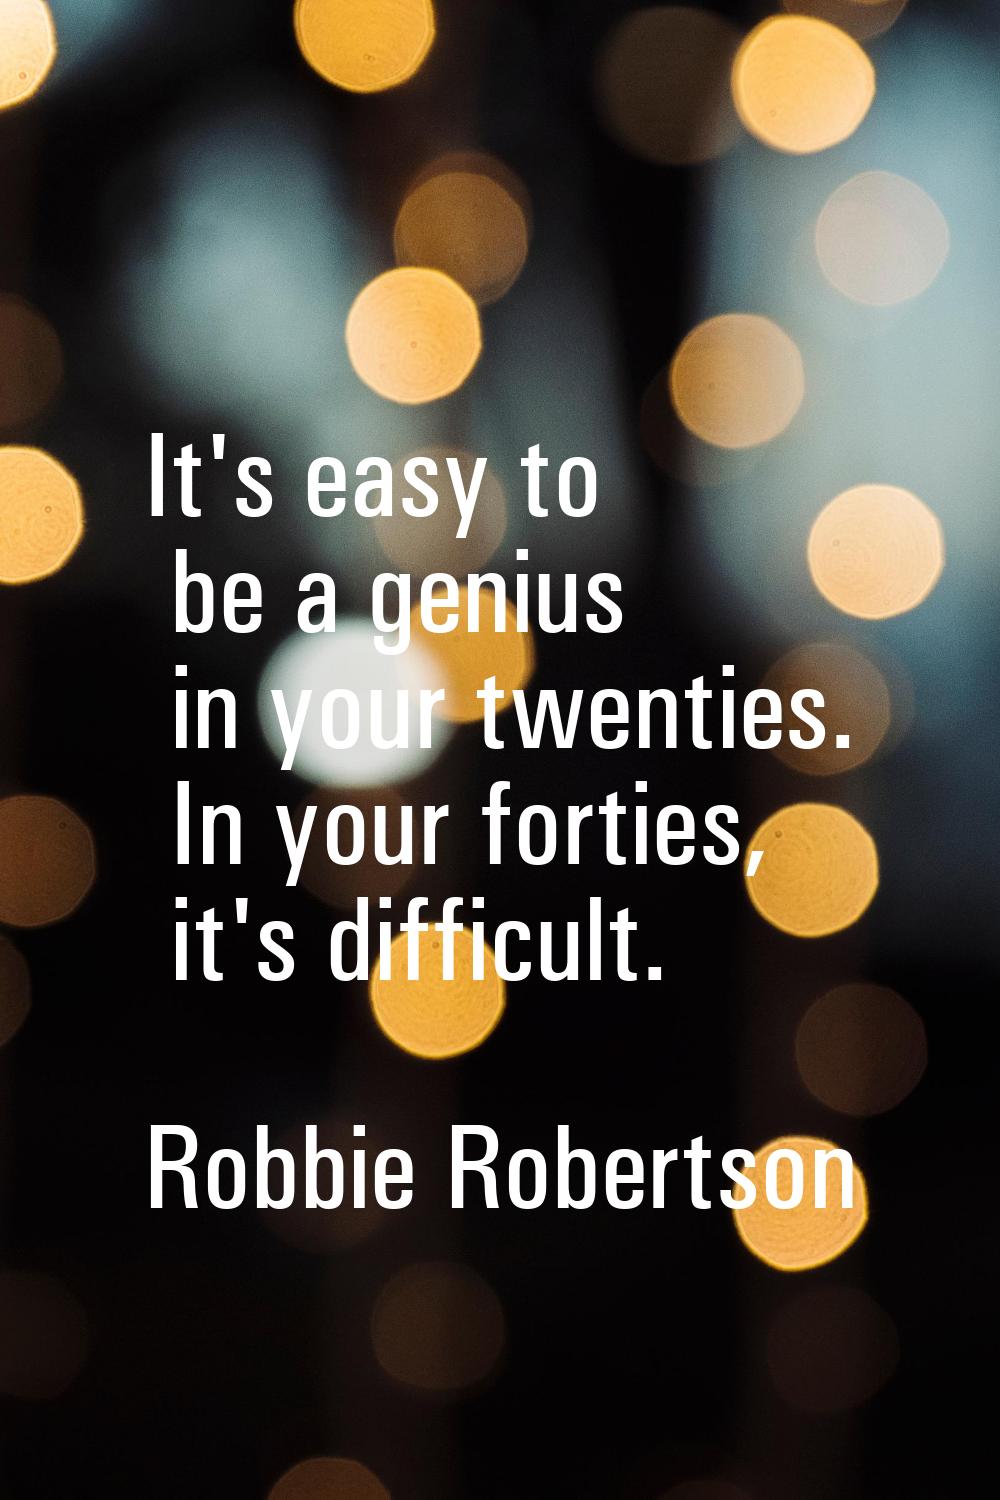 It's easy to be a genius in your twenties. In your forties, it's difficult.